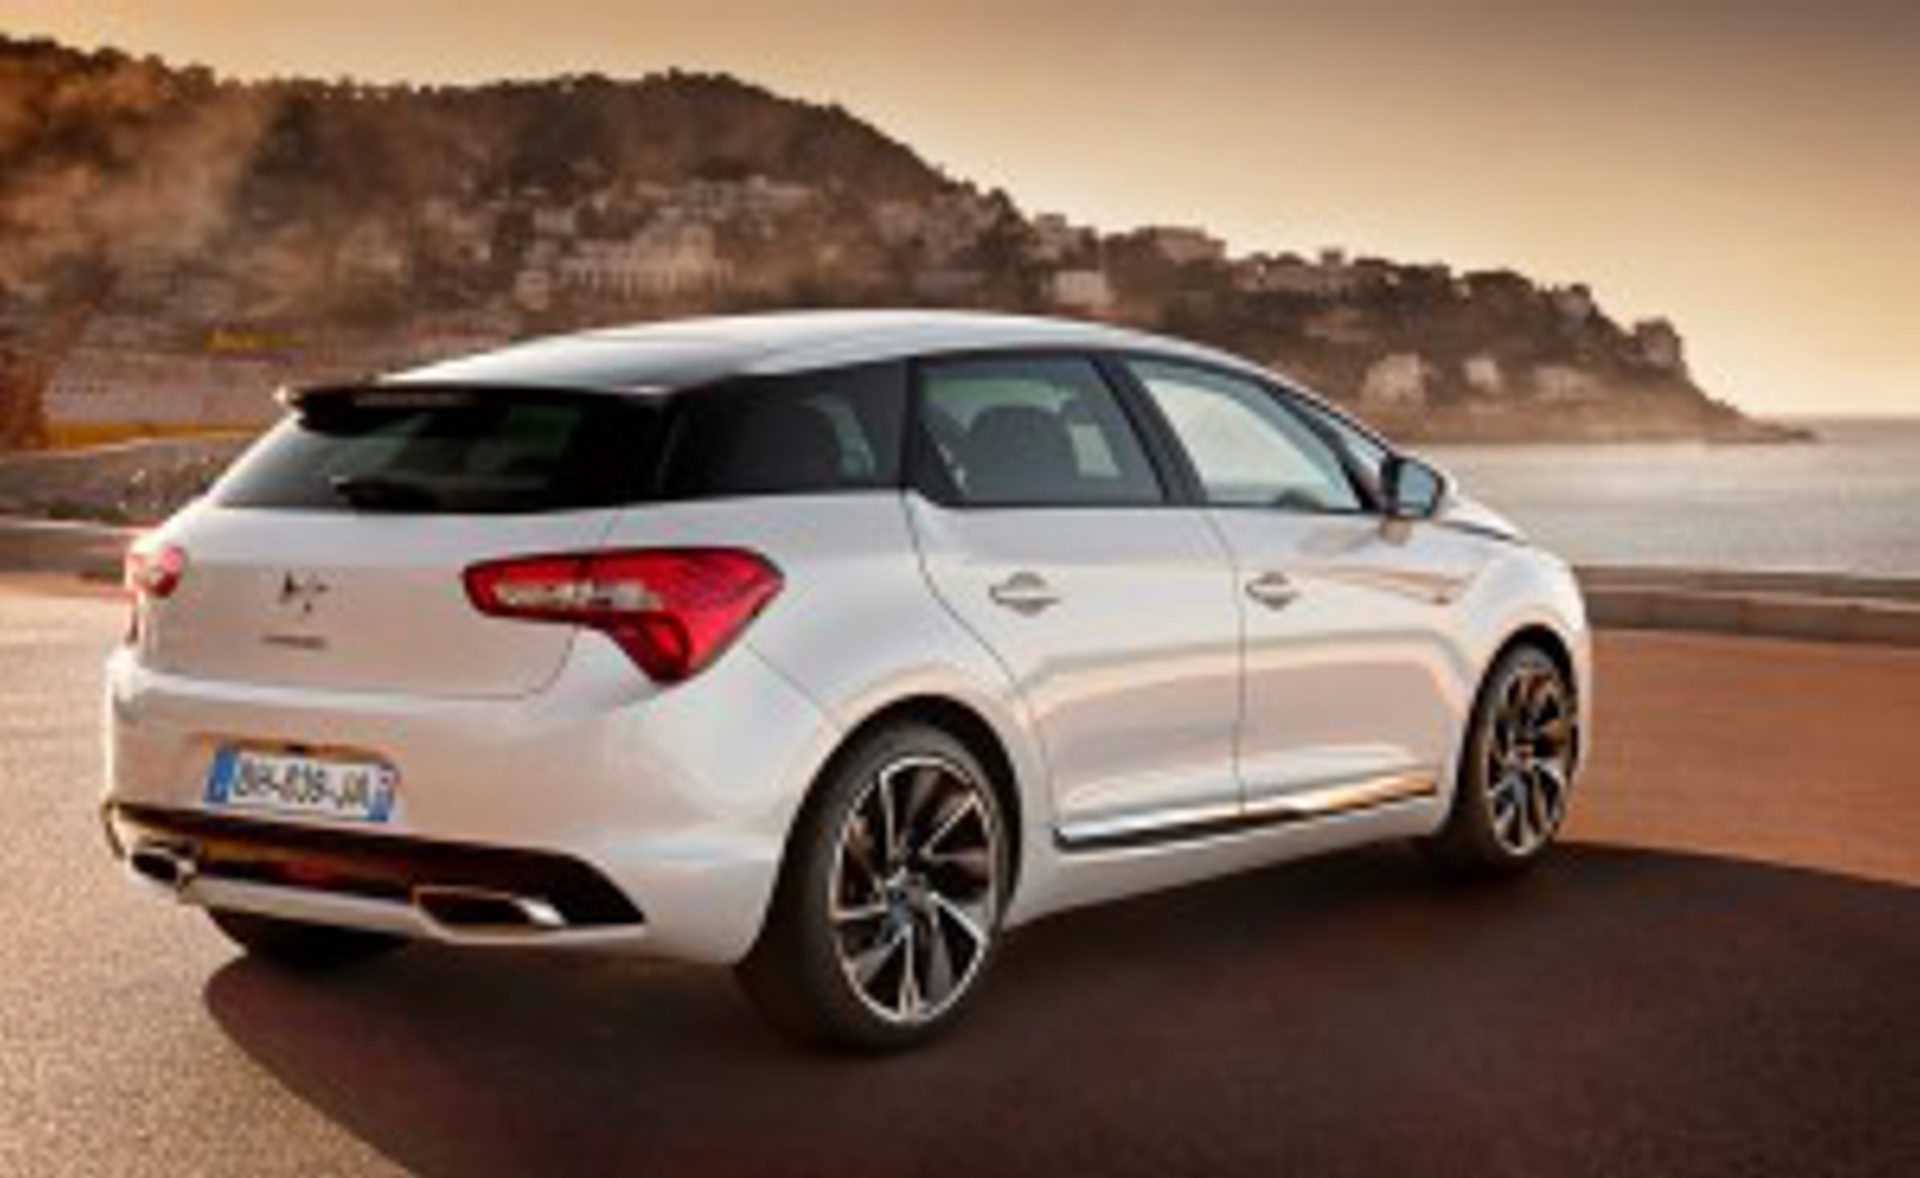 CLEAR CHANNEL TAKES DELIVERY OF FIRST CITROËN DS4 5-DOOR COUPÉS